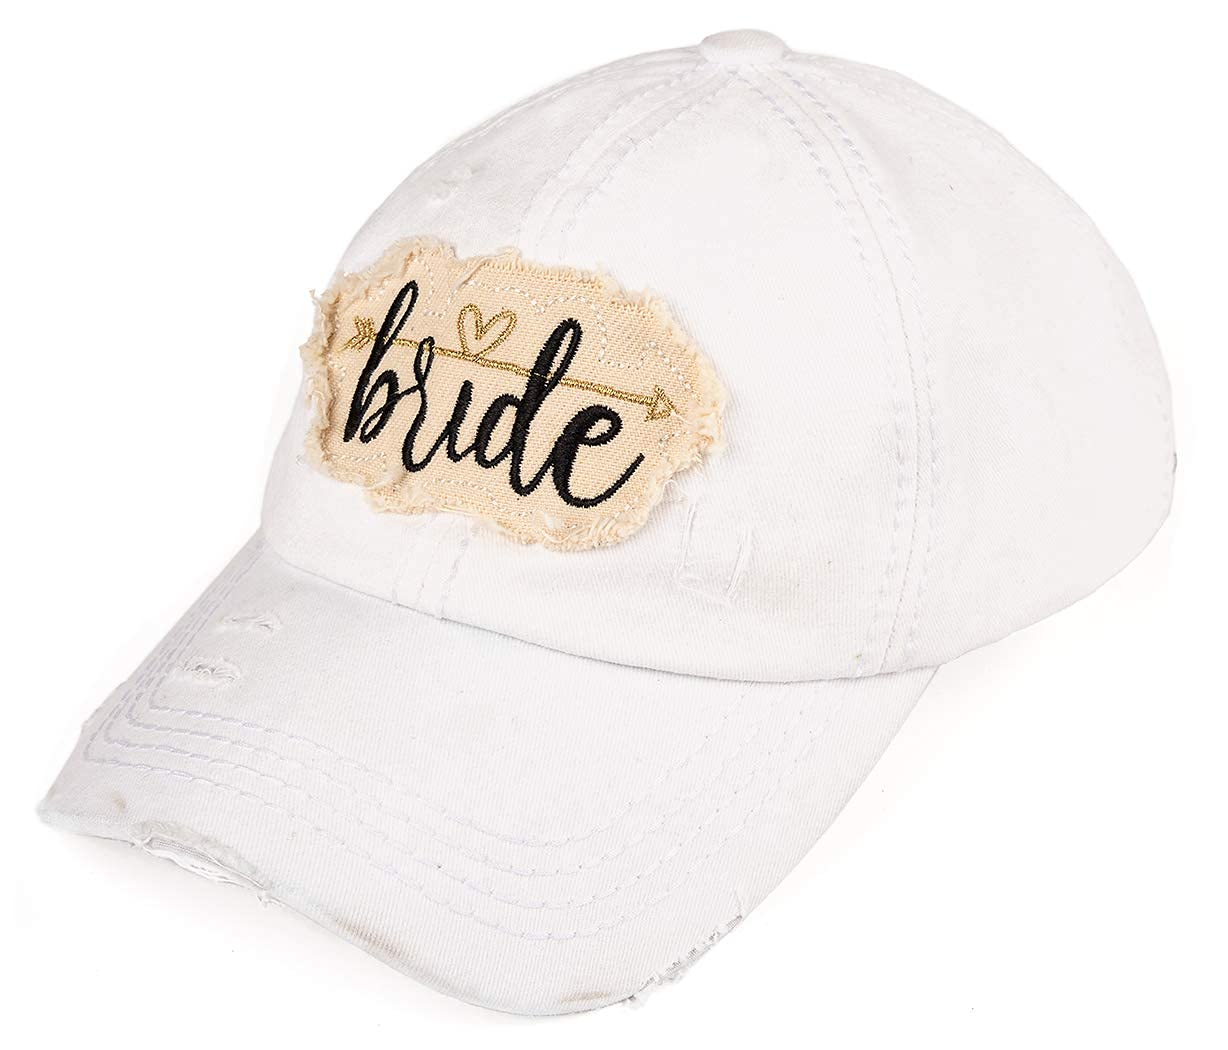 Bride I Do Distressed Baseball Cap by Funky Junque